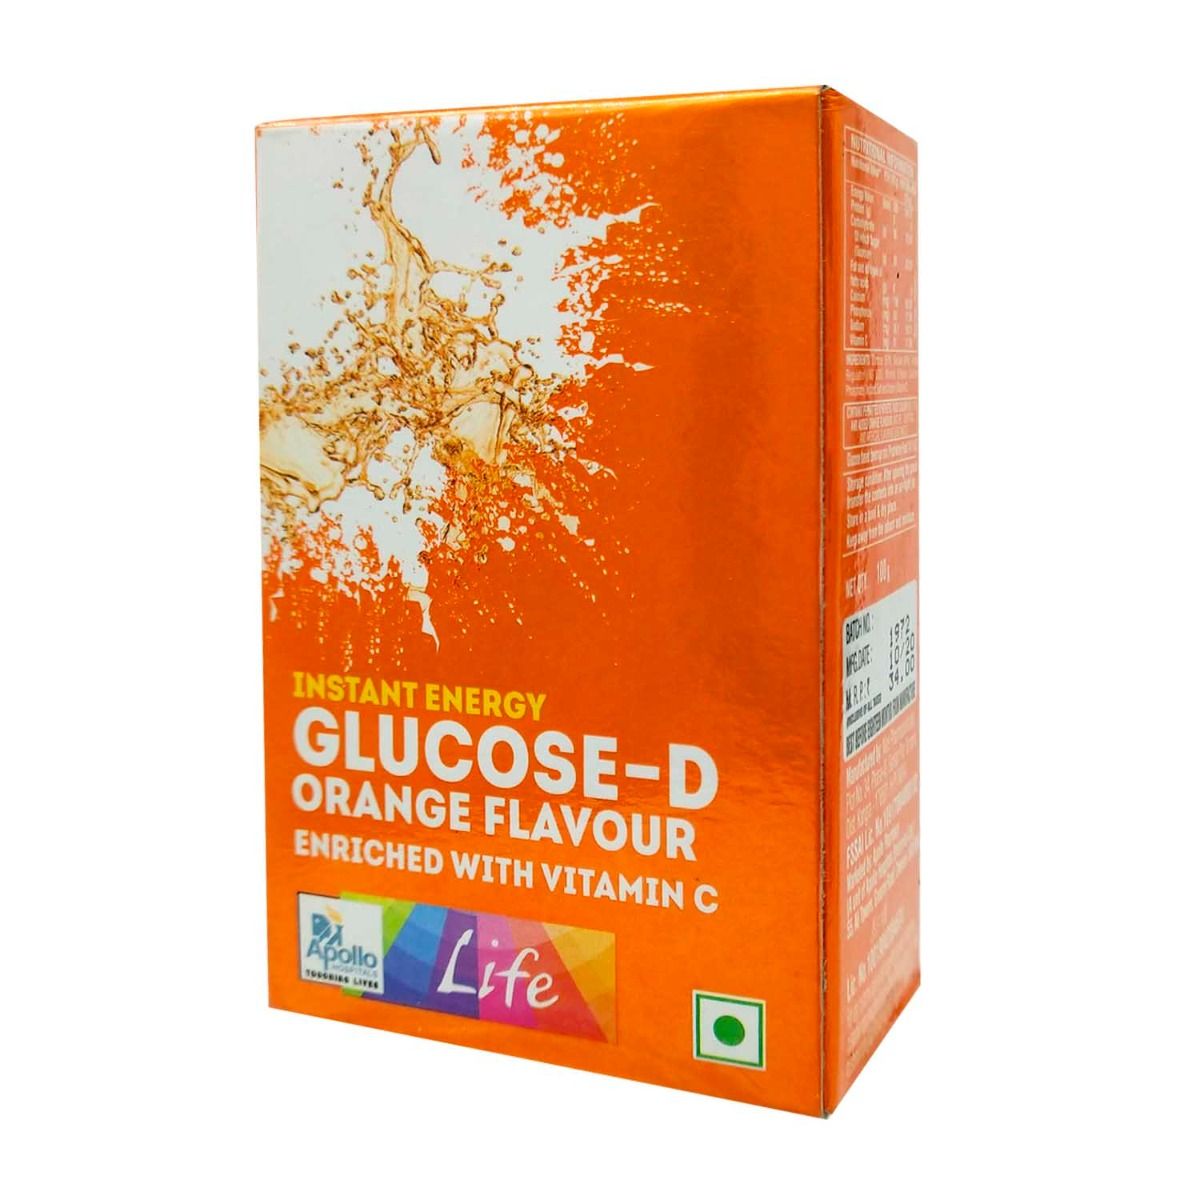 Apollo Life Glucose-D Orange Flavour Instant Energy Drink, 100 gm Refill Pack, Pack of 1 